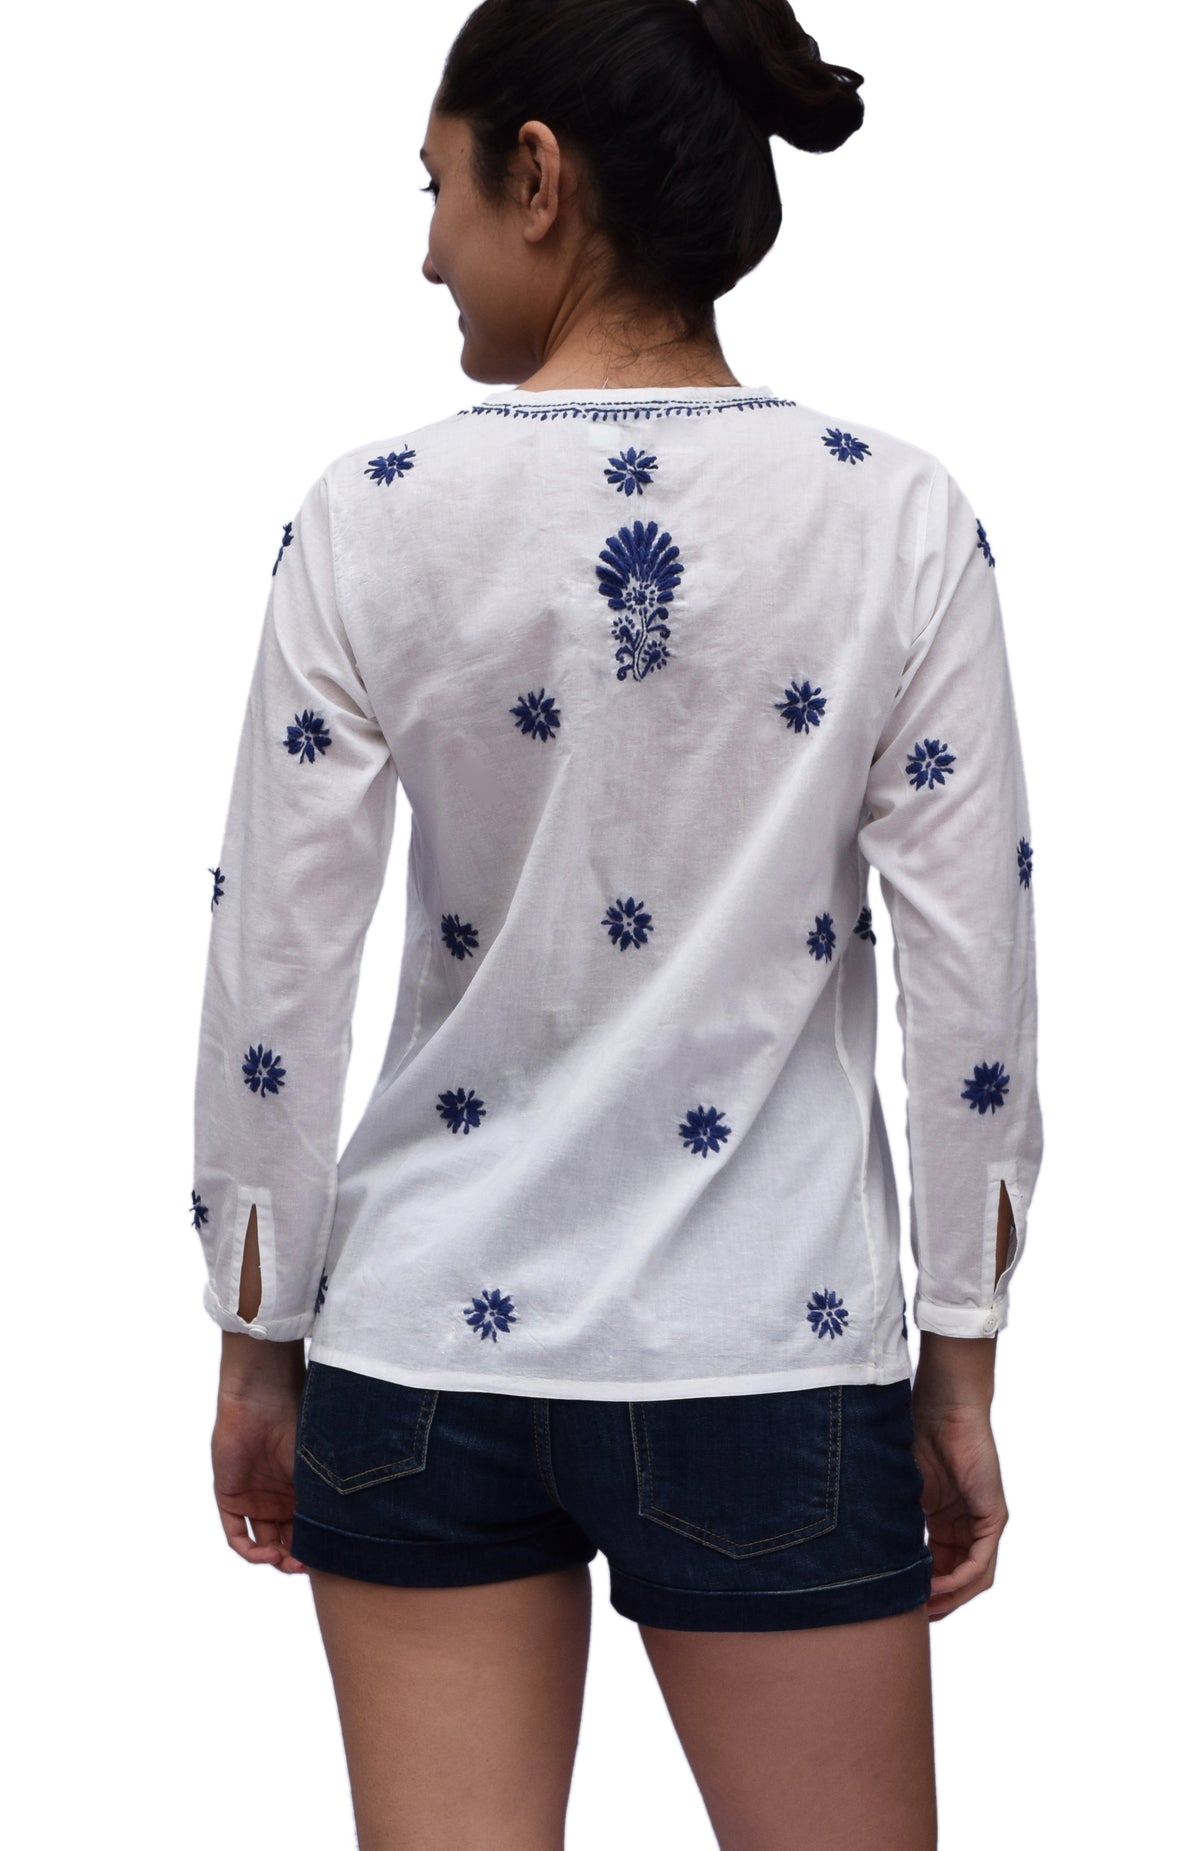 LISA Pure Cotton Hand Embroidered Boho Top, Blouse